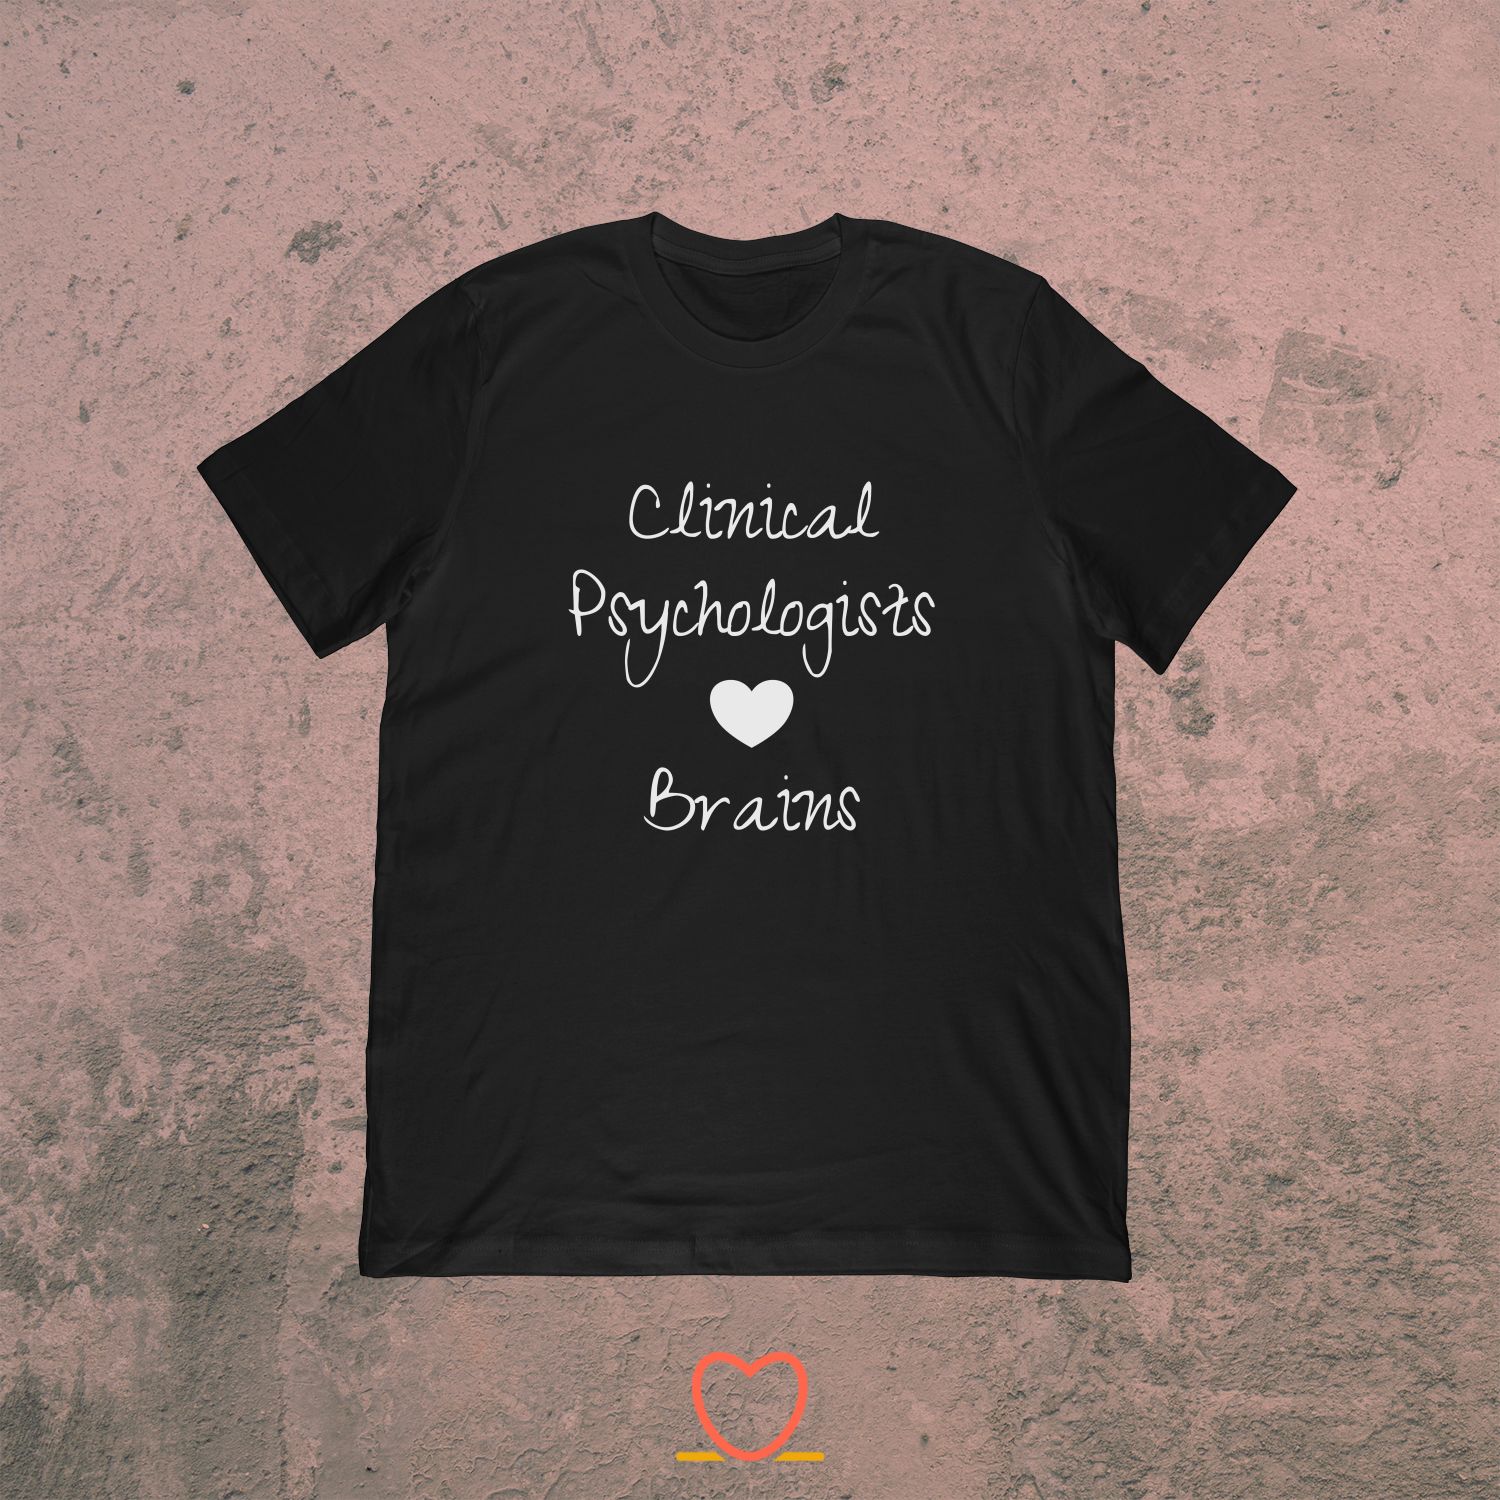 Clinical Psychologists Love Brains – Clinical Psychologist Tee